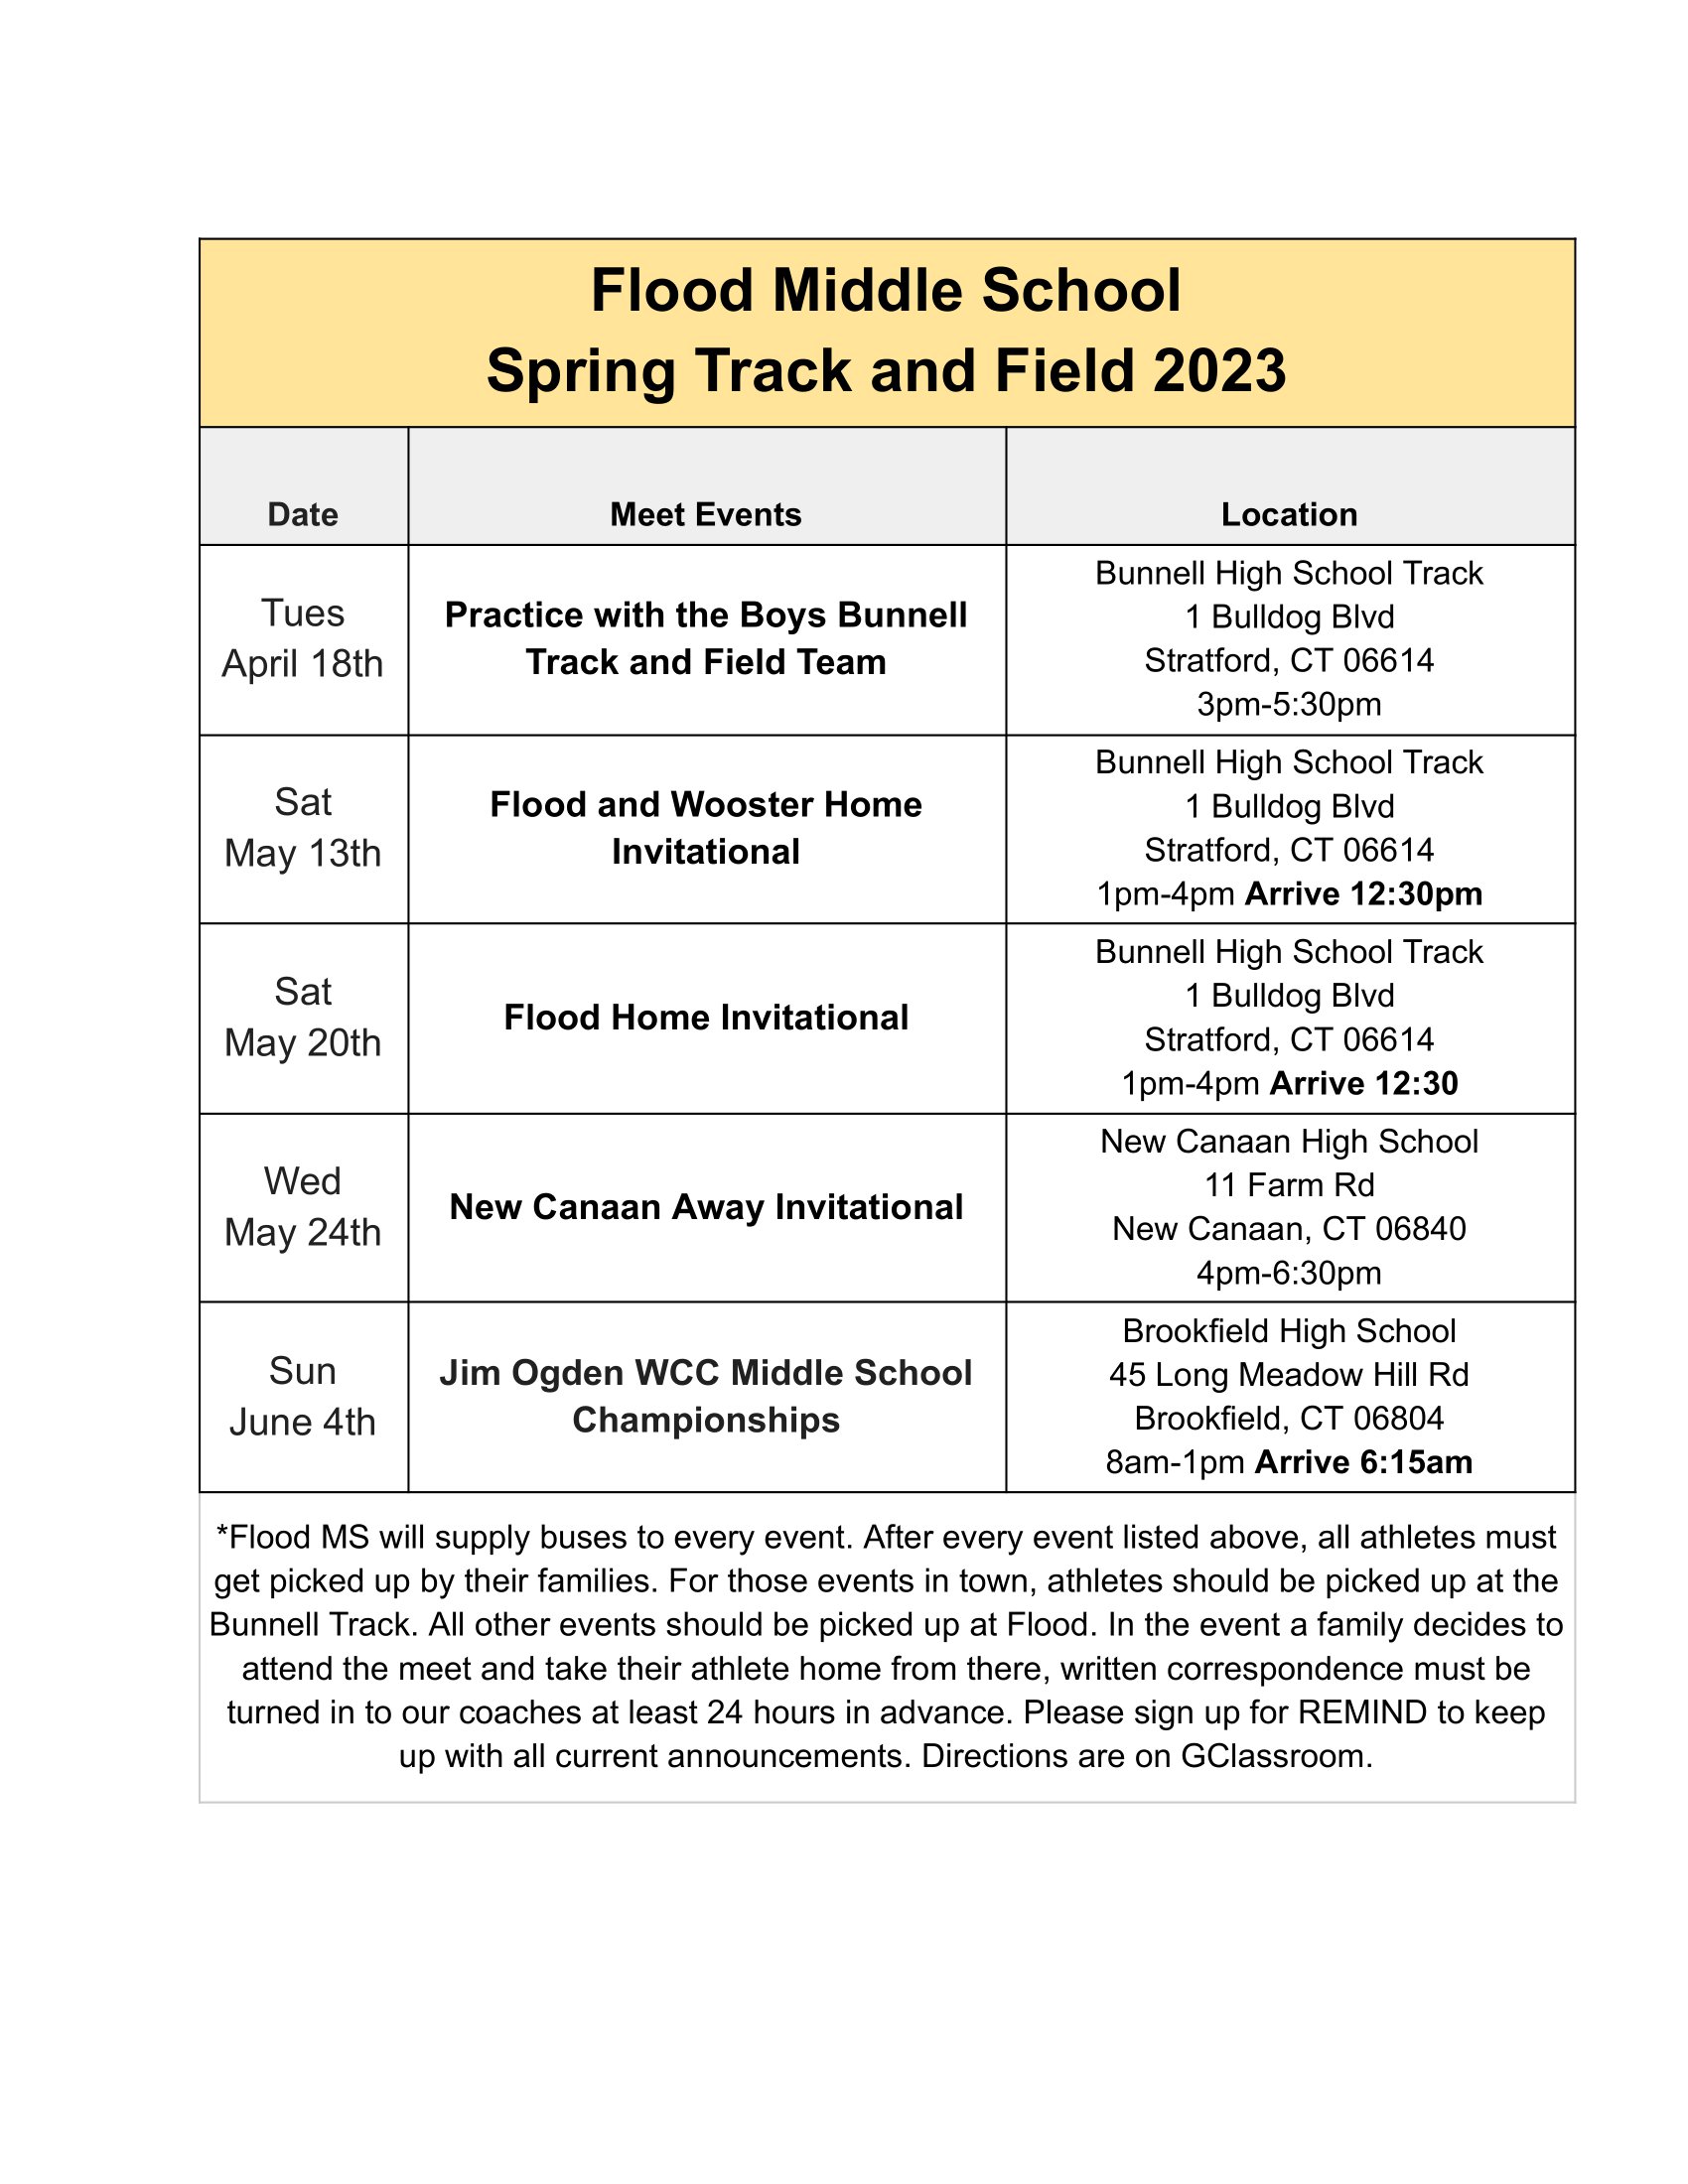 Flood track and field event schedule